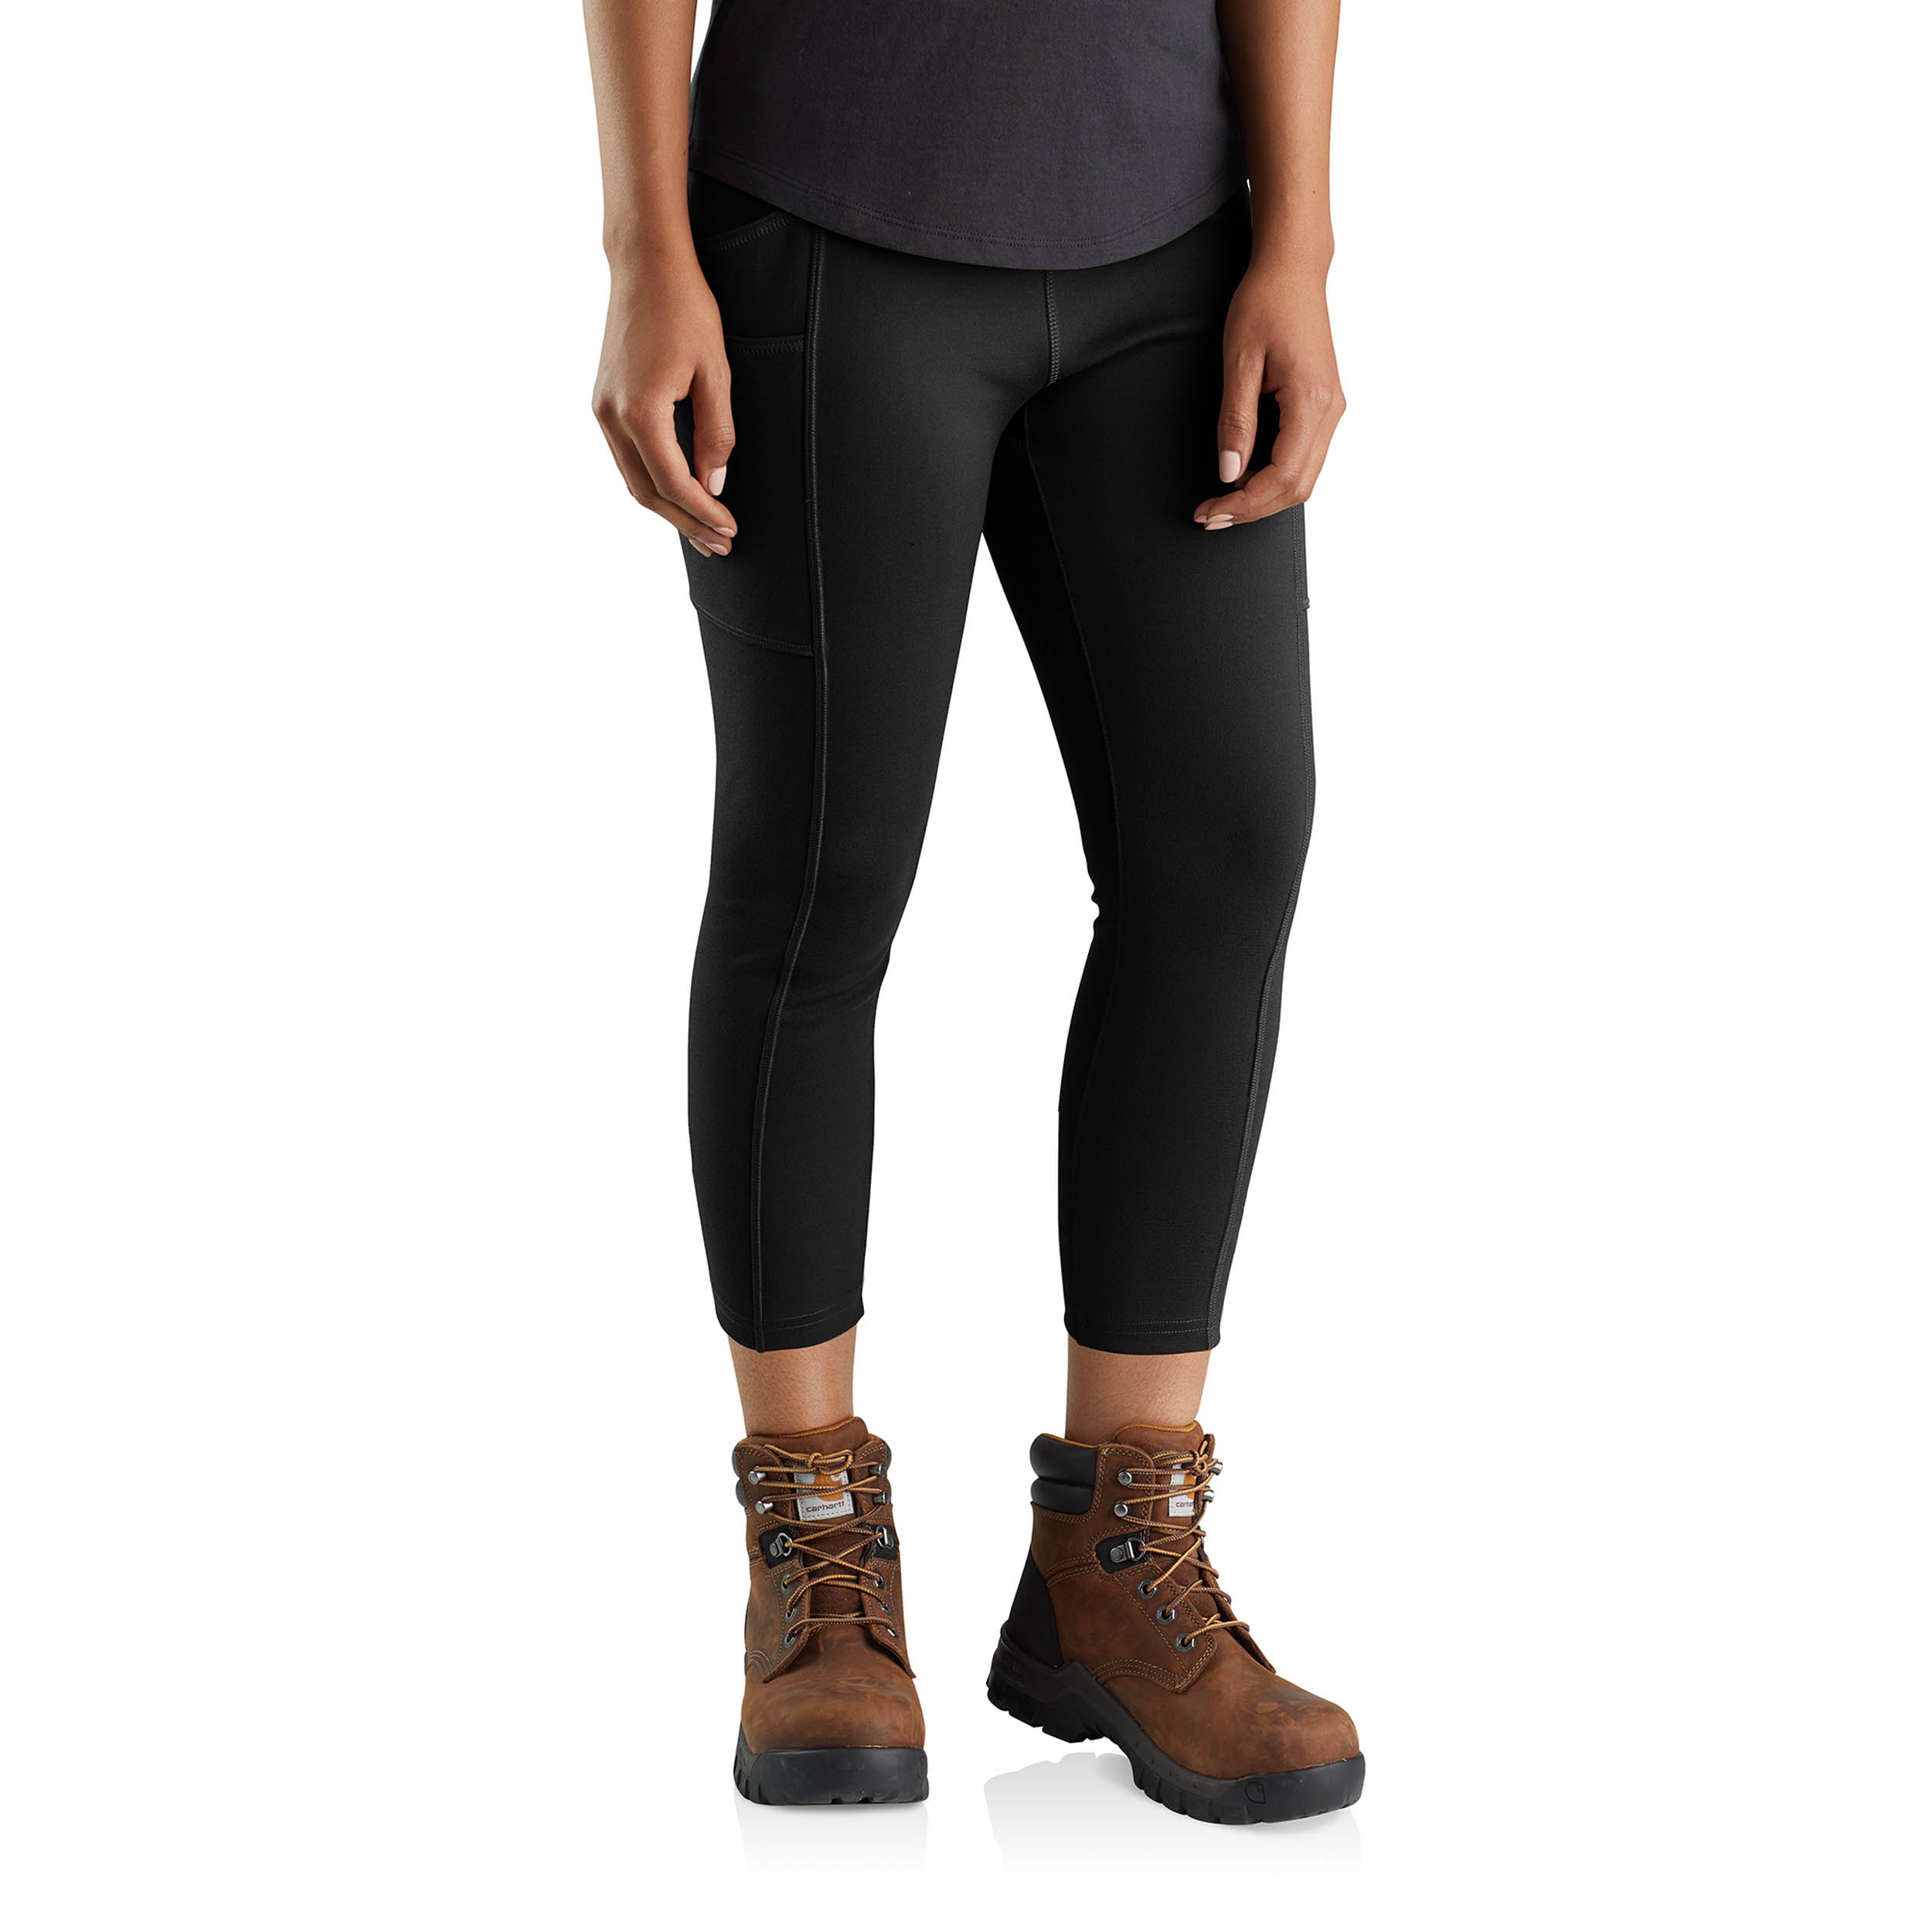 Carhartt Women's Force Fitted Midweight Utility Legging, Blackberry, 3X :  Buy Online at Best Price in KSA - Souq is now : Fashion